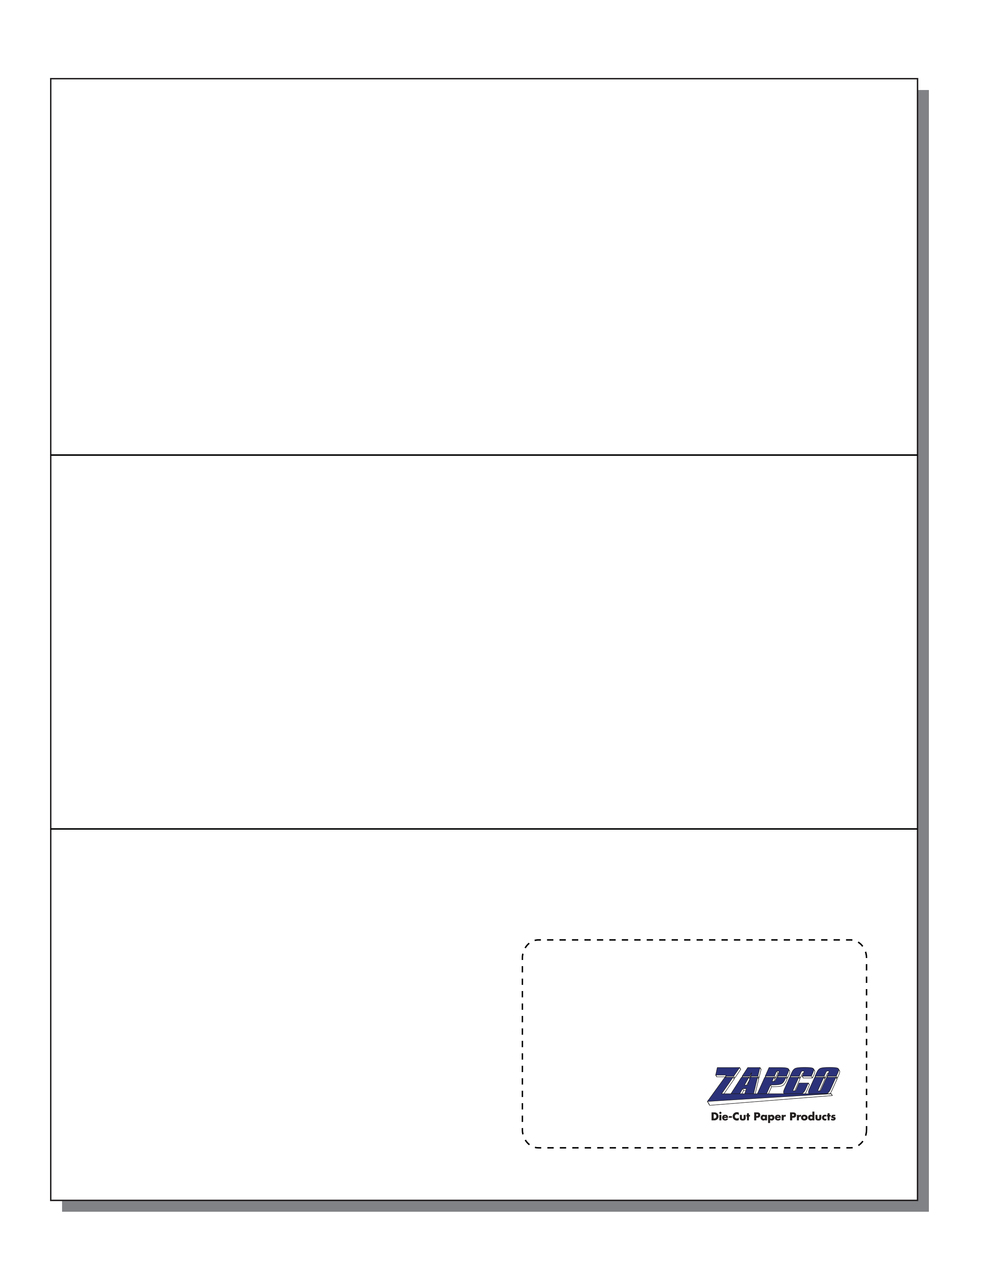 Item 100: 1-Up 3 3/4" x 8 1/2" Tri-Fold Mailer with Club Card 8 1/2" x 11" Sheet(250 Sheets)